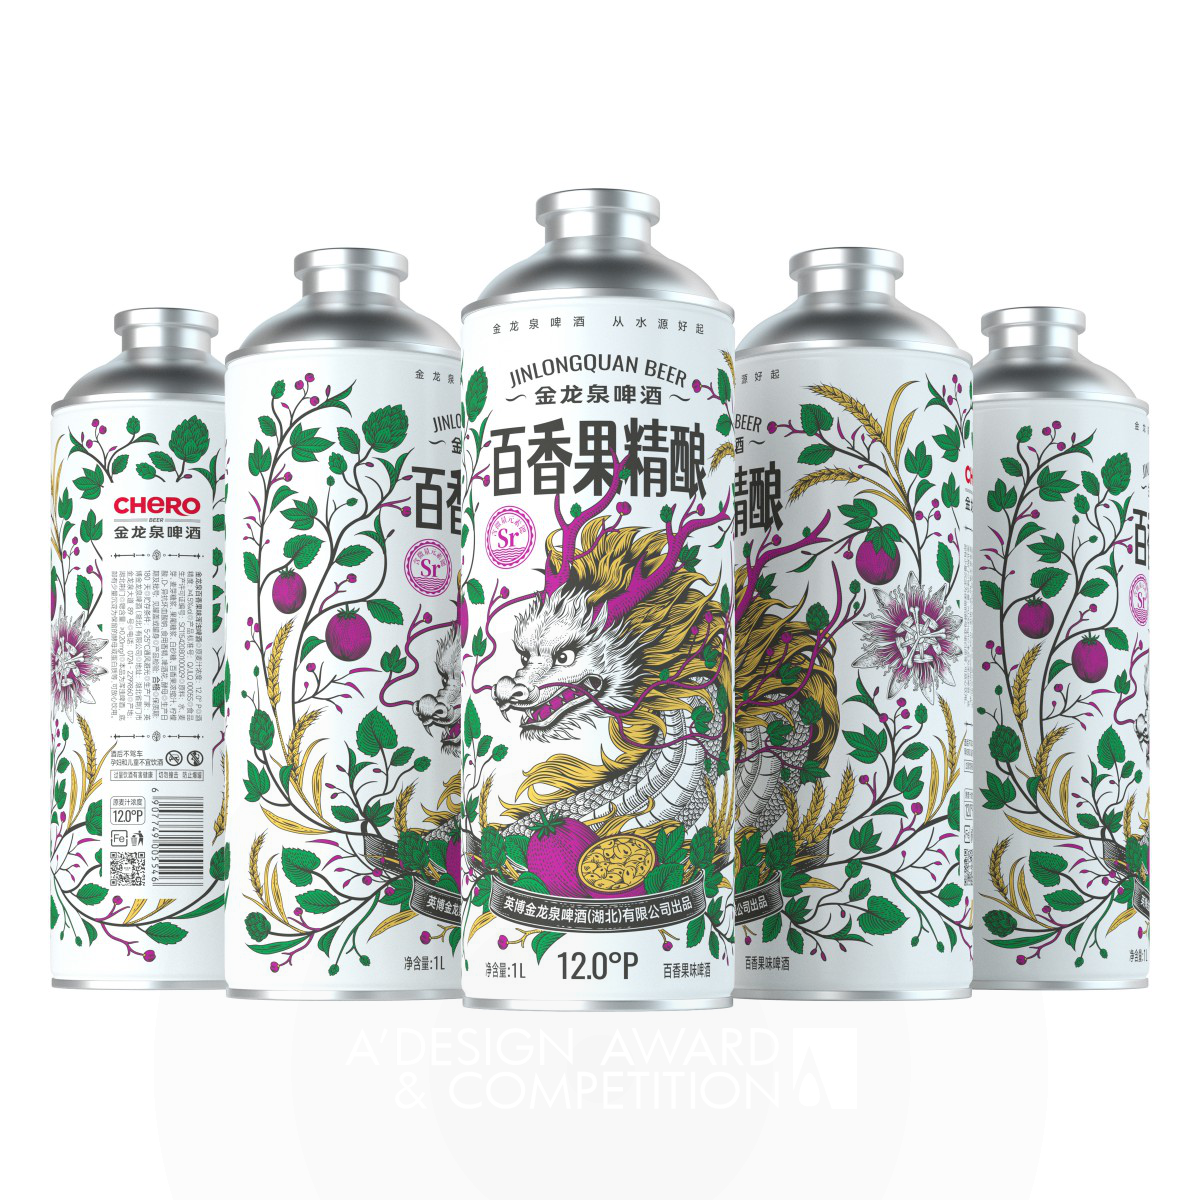 Jin Zhang wins Bronze at the prestigious A' Packaging Design Award with Passion Fruit Beer.